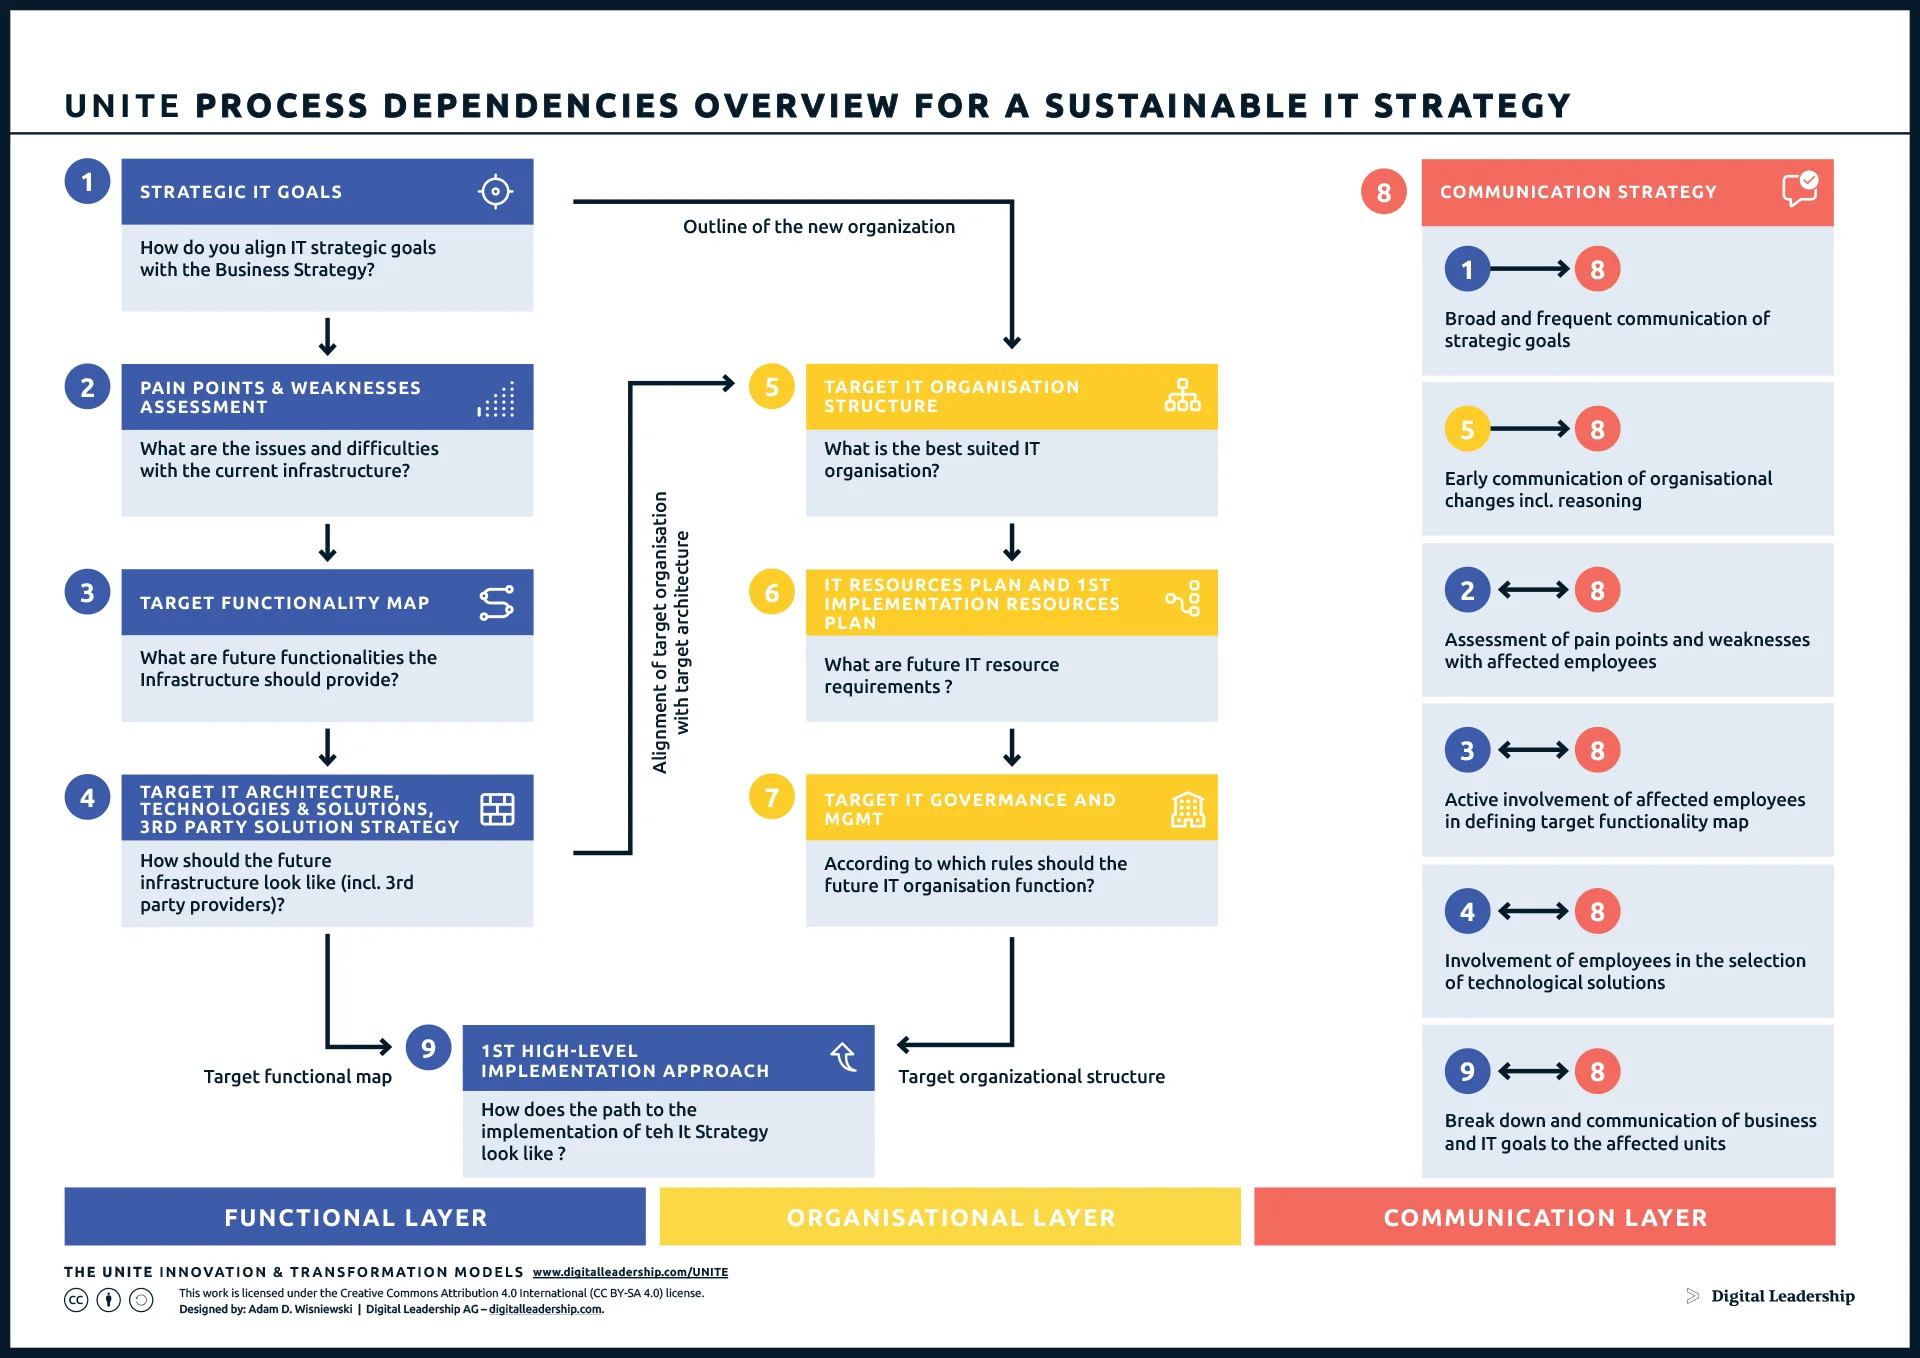 Unite process for a sustainable IT strategy